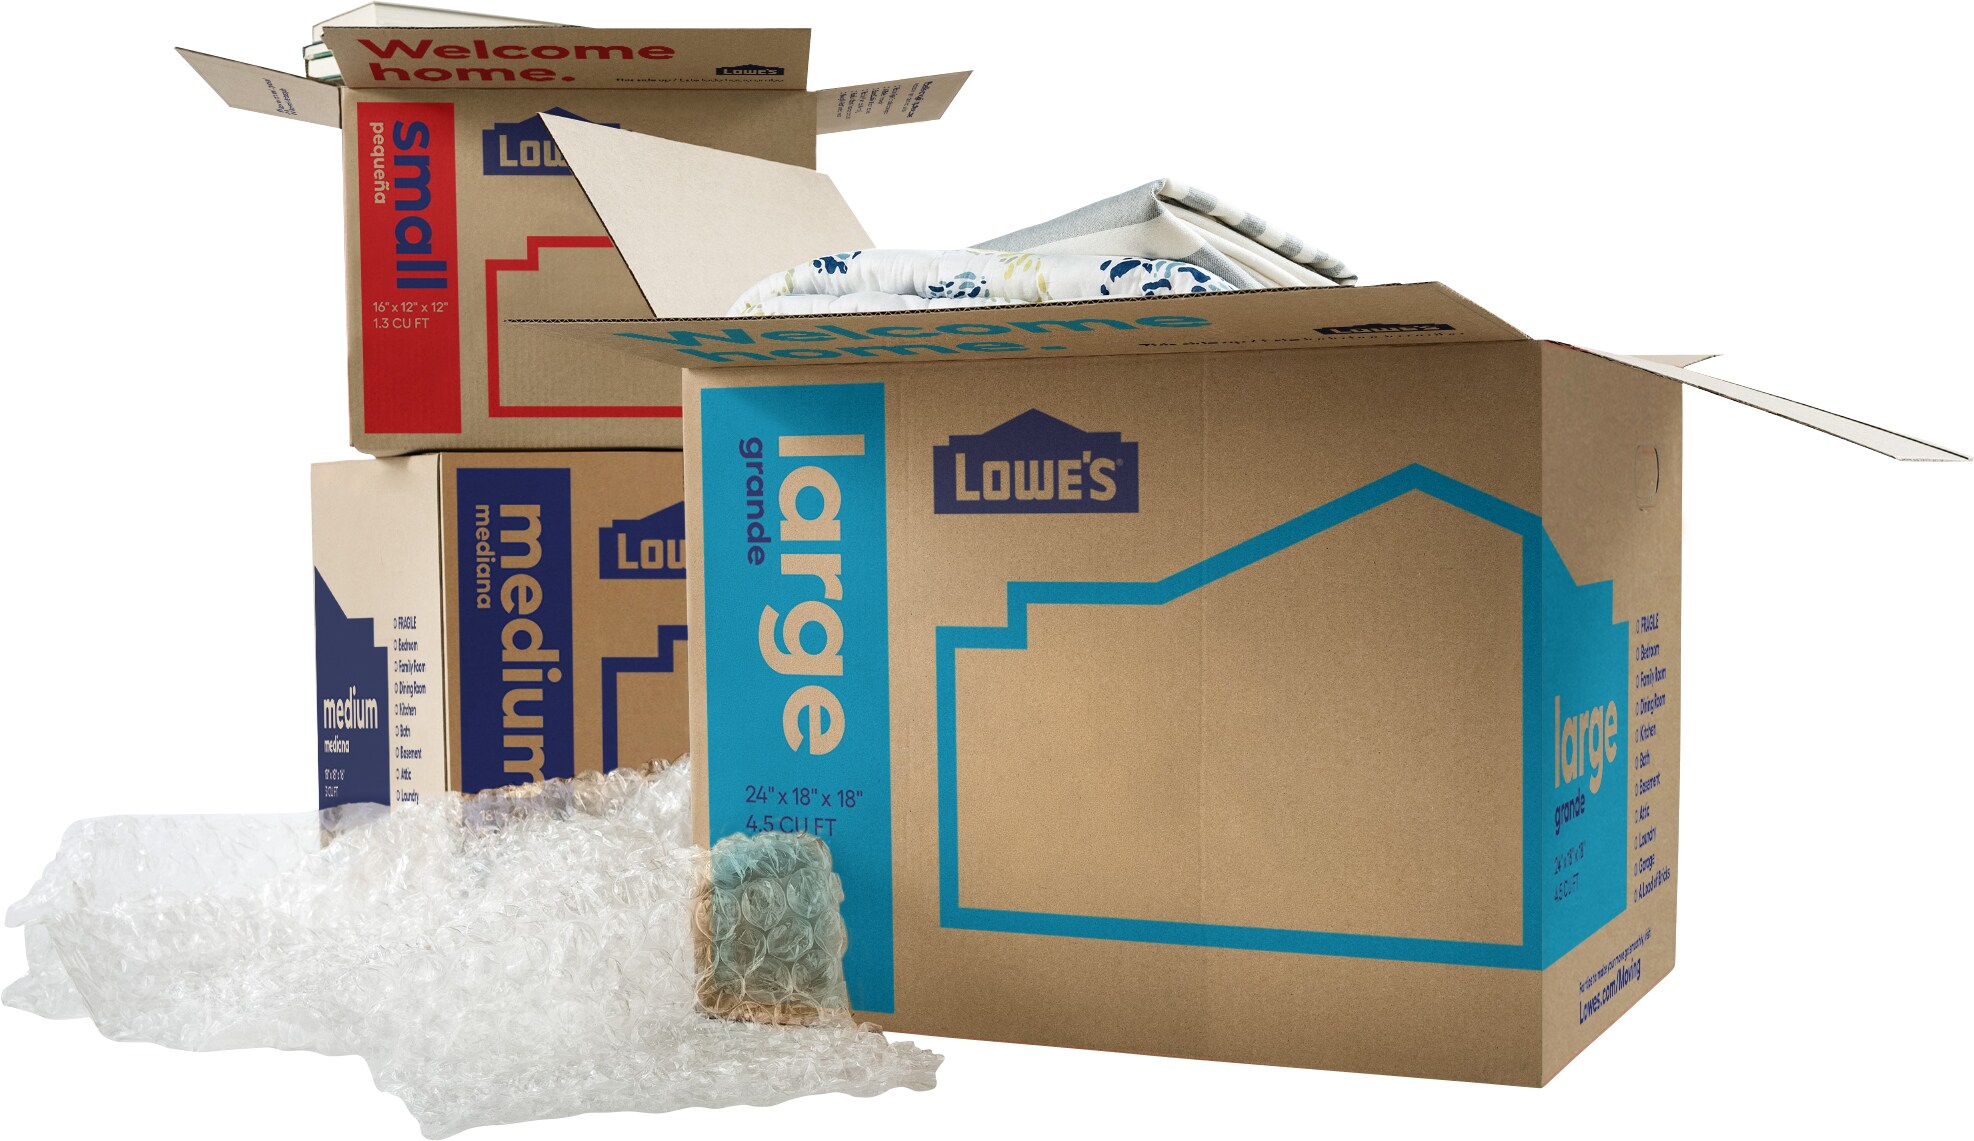 Large Cardboard Boxes - Moving Boxes Various Sizes